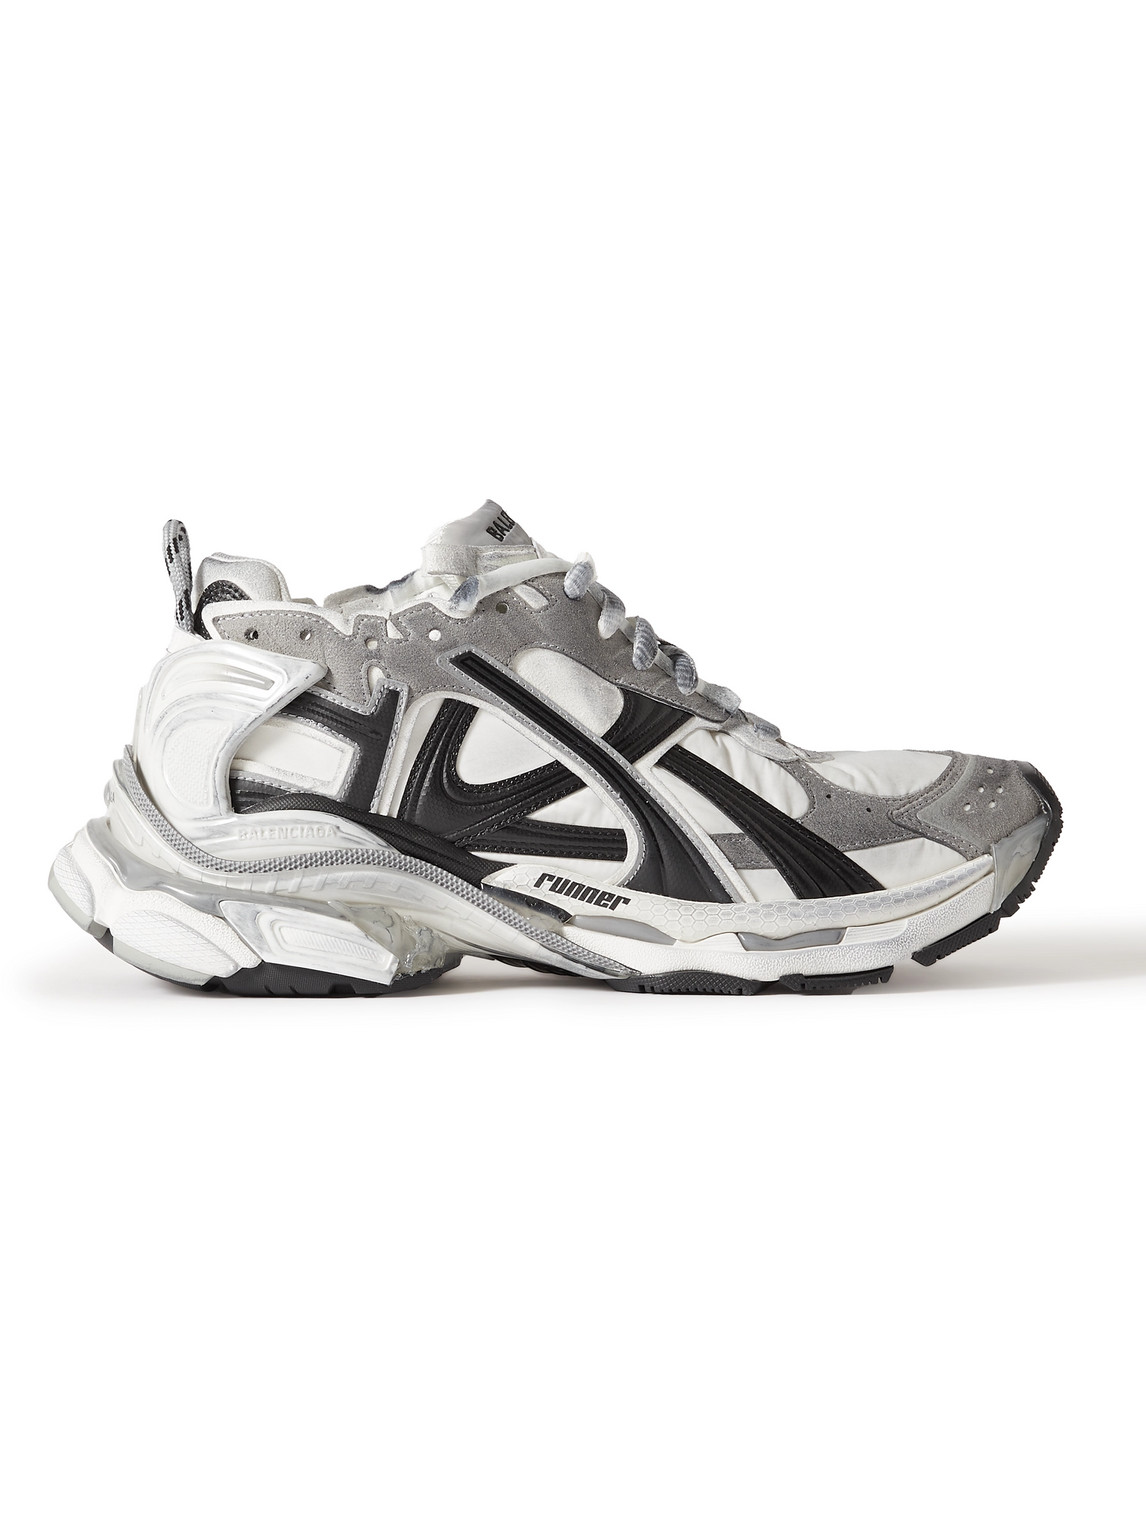 Balenciaga Runner Distressed Nylon, Suede And Rubber Sneakers In Gray